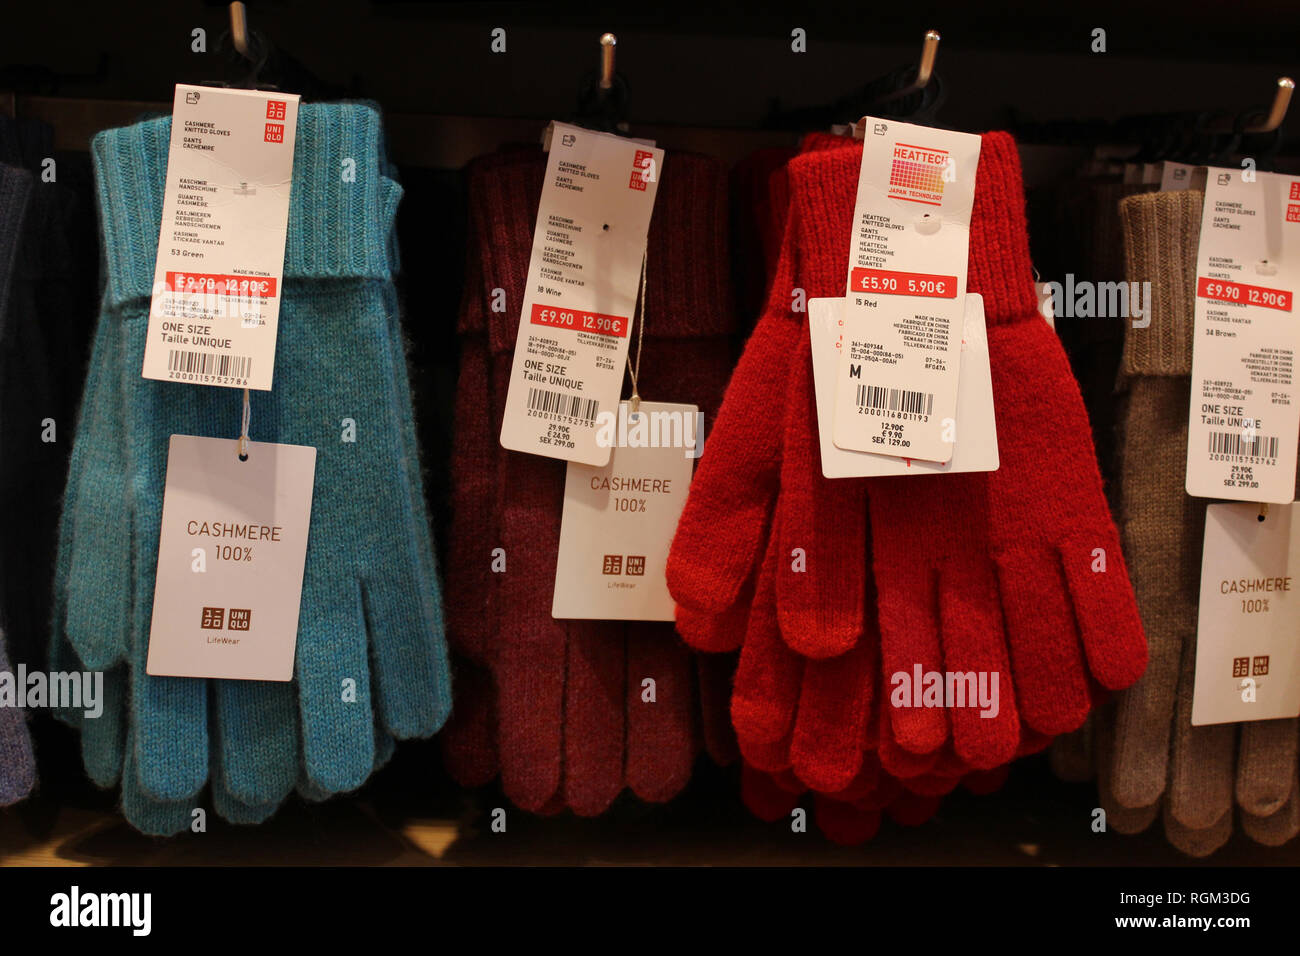 Uniqlo cashmere gloves displayed with price tags, close-up Stock Photo -  Alamy